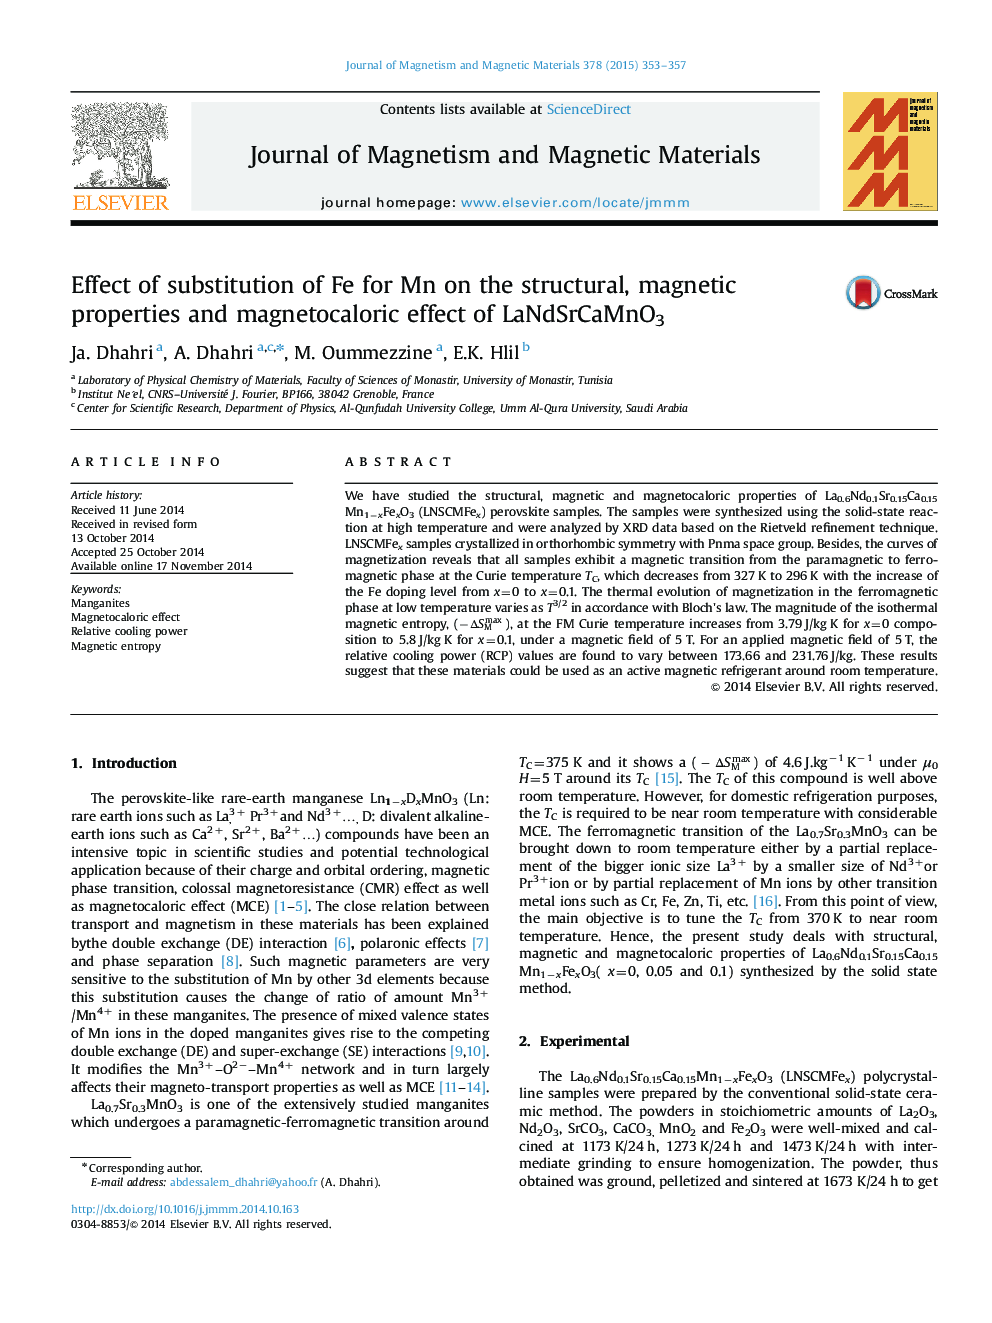 Effect of substitution of Fe for Mn on the structural, magnetic properties and magnetocaloric effect of LaNdSrCaMnO3